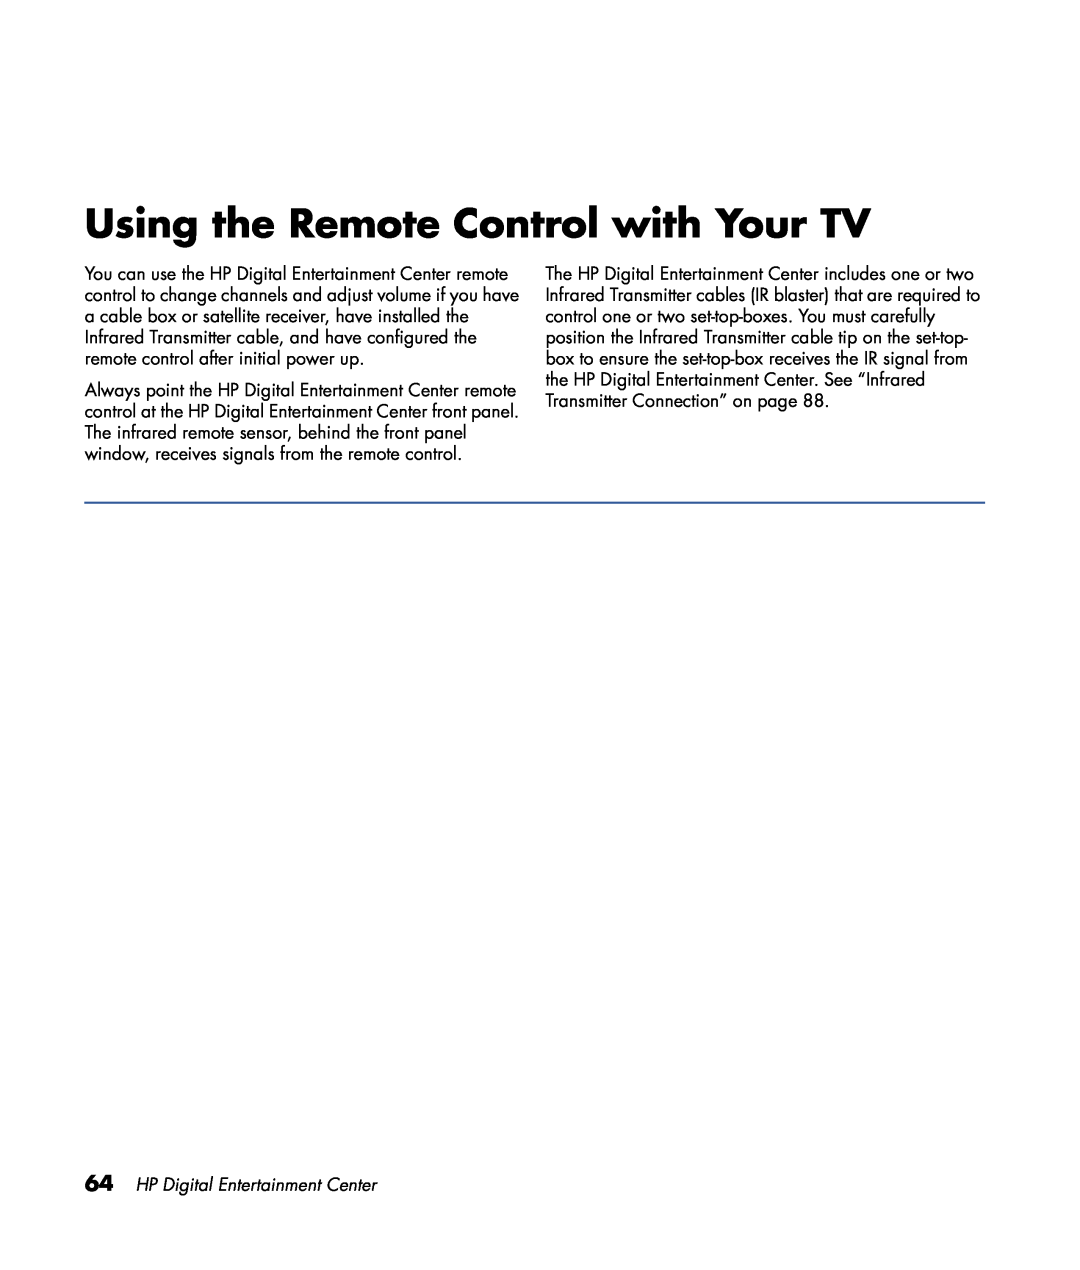 HP z557, z555, z552, z545, z540 manual Using the Remote Control with Your TV, HP Digital Entertainment Center 